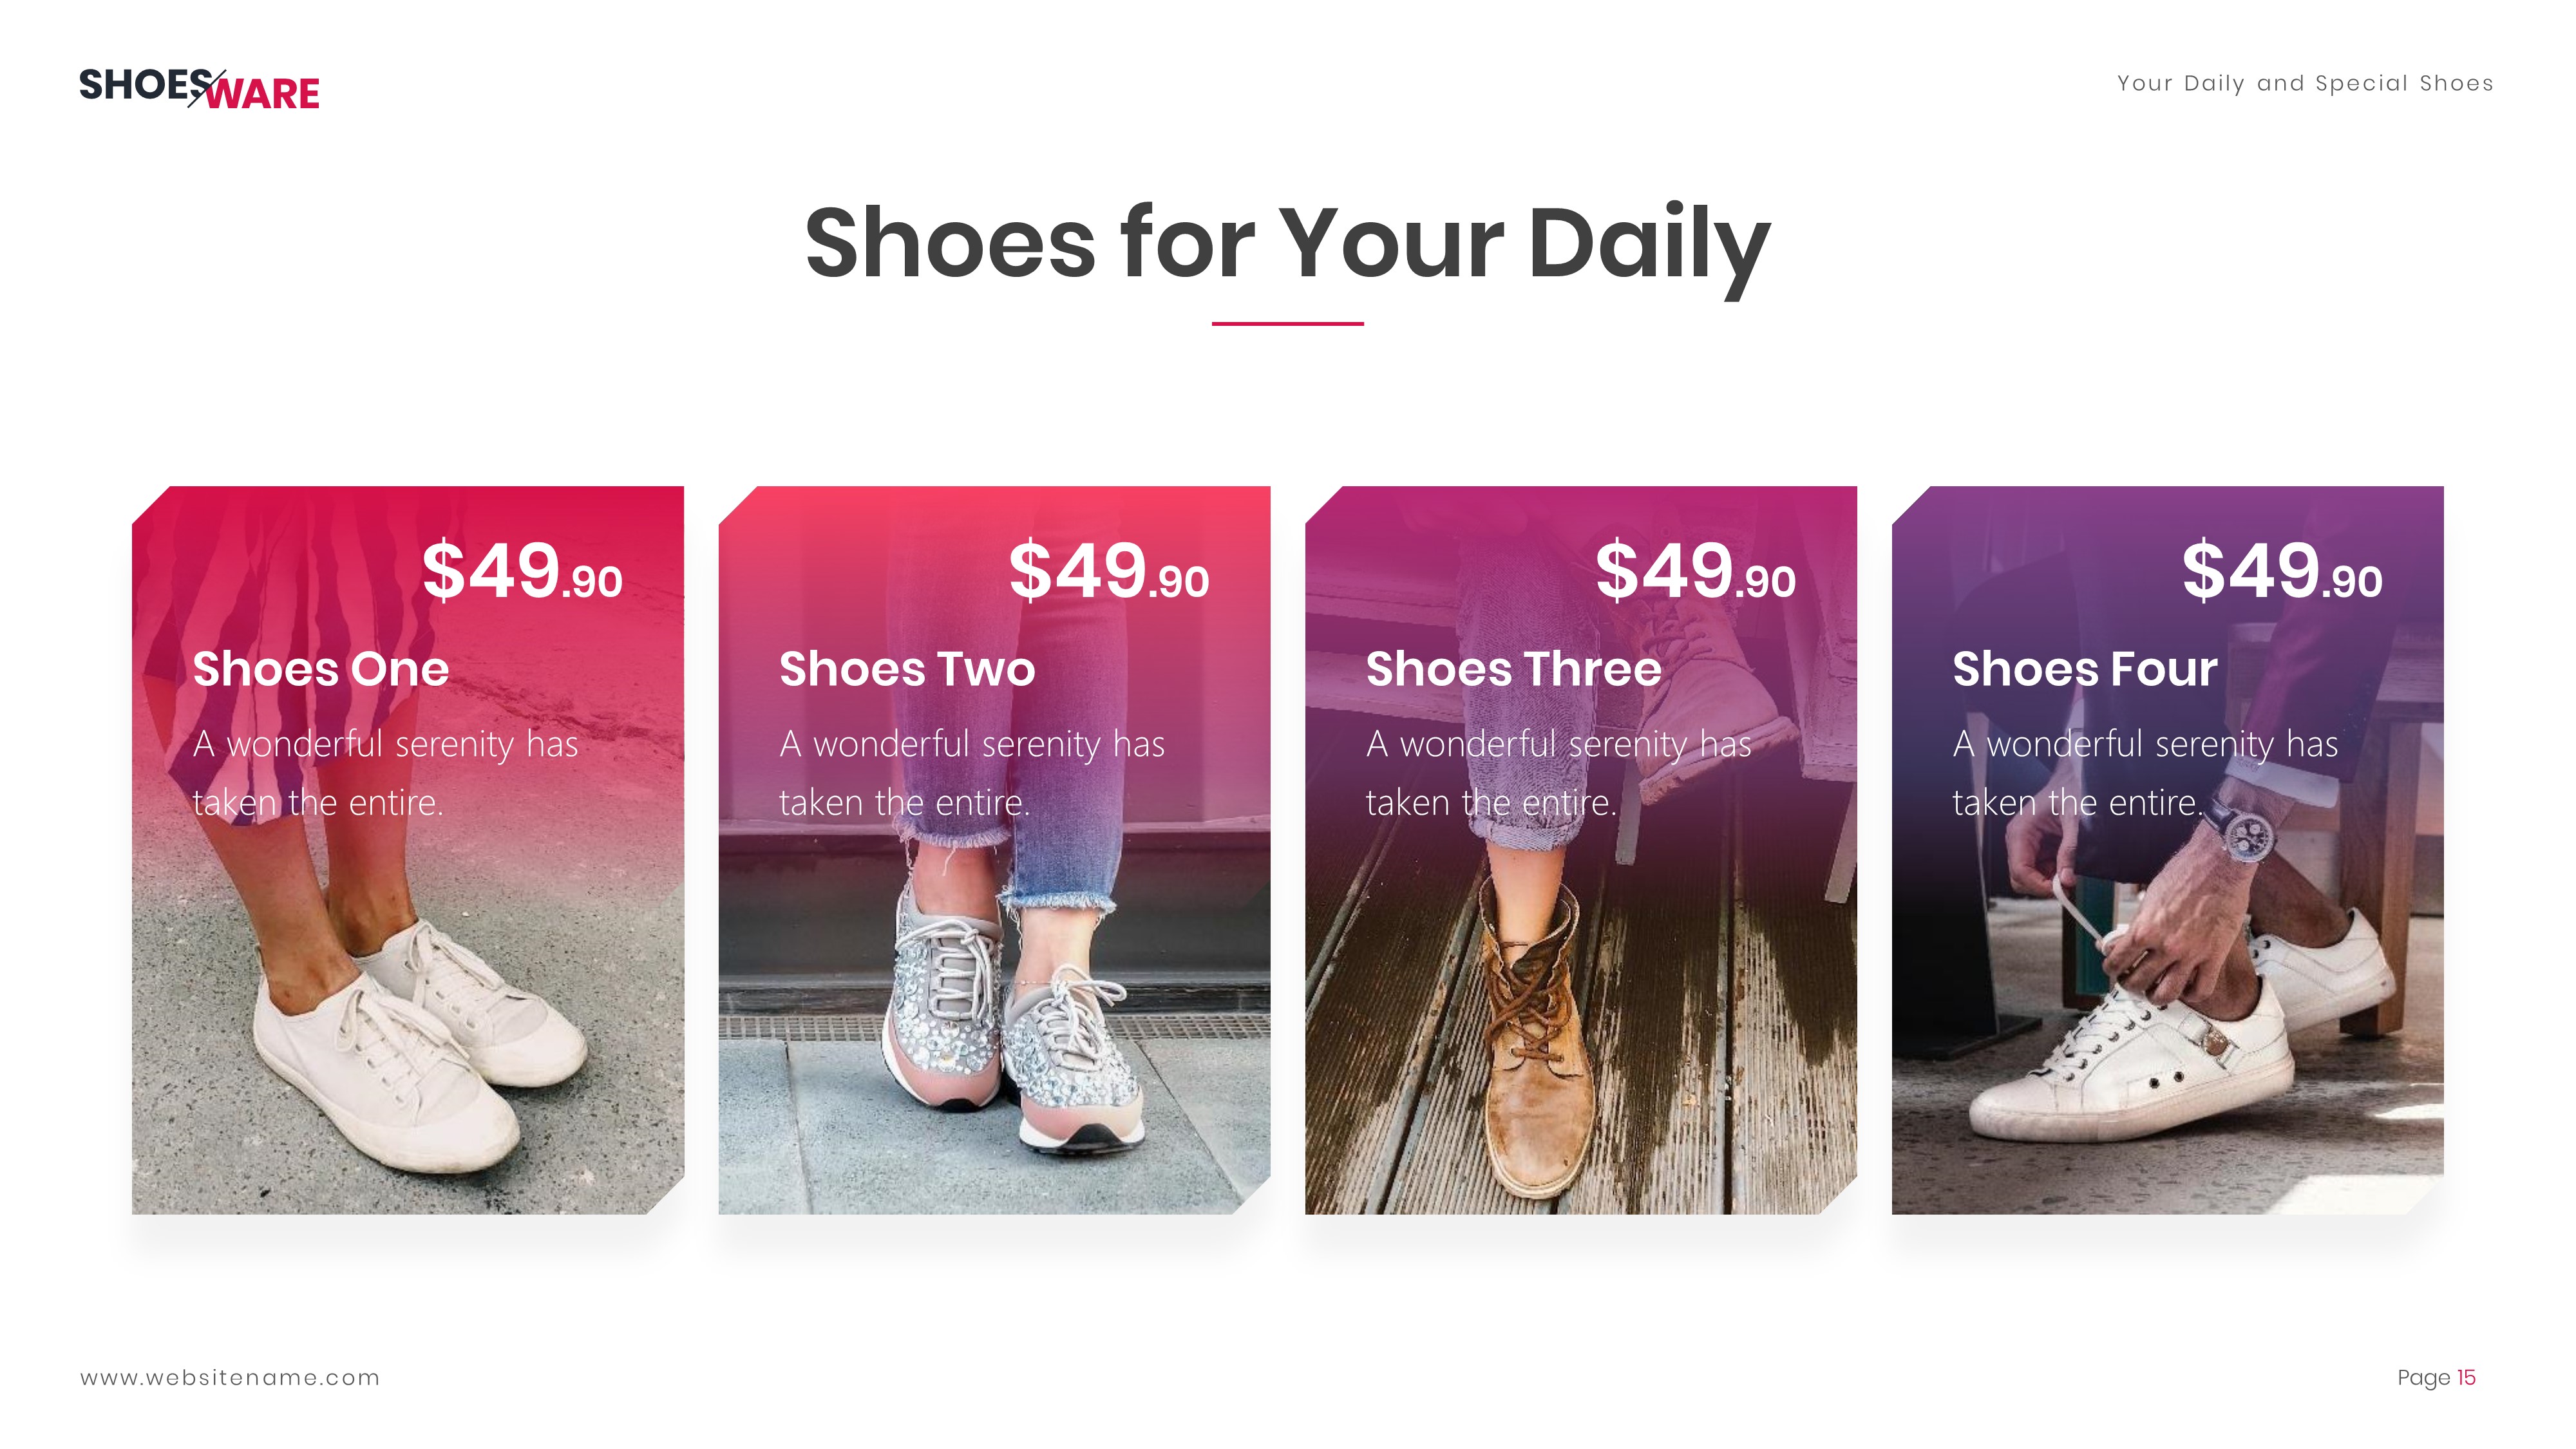 Shoesware E-Commerce PowerPoint Template by RRgraph | GraphicRiver